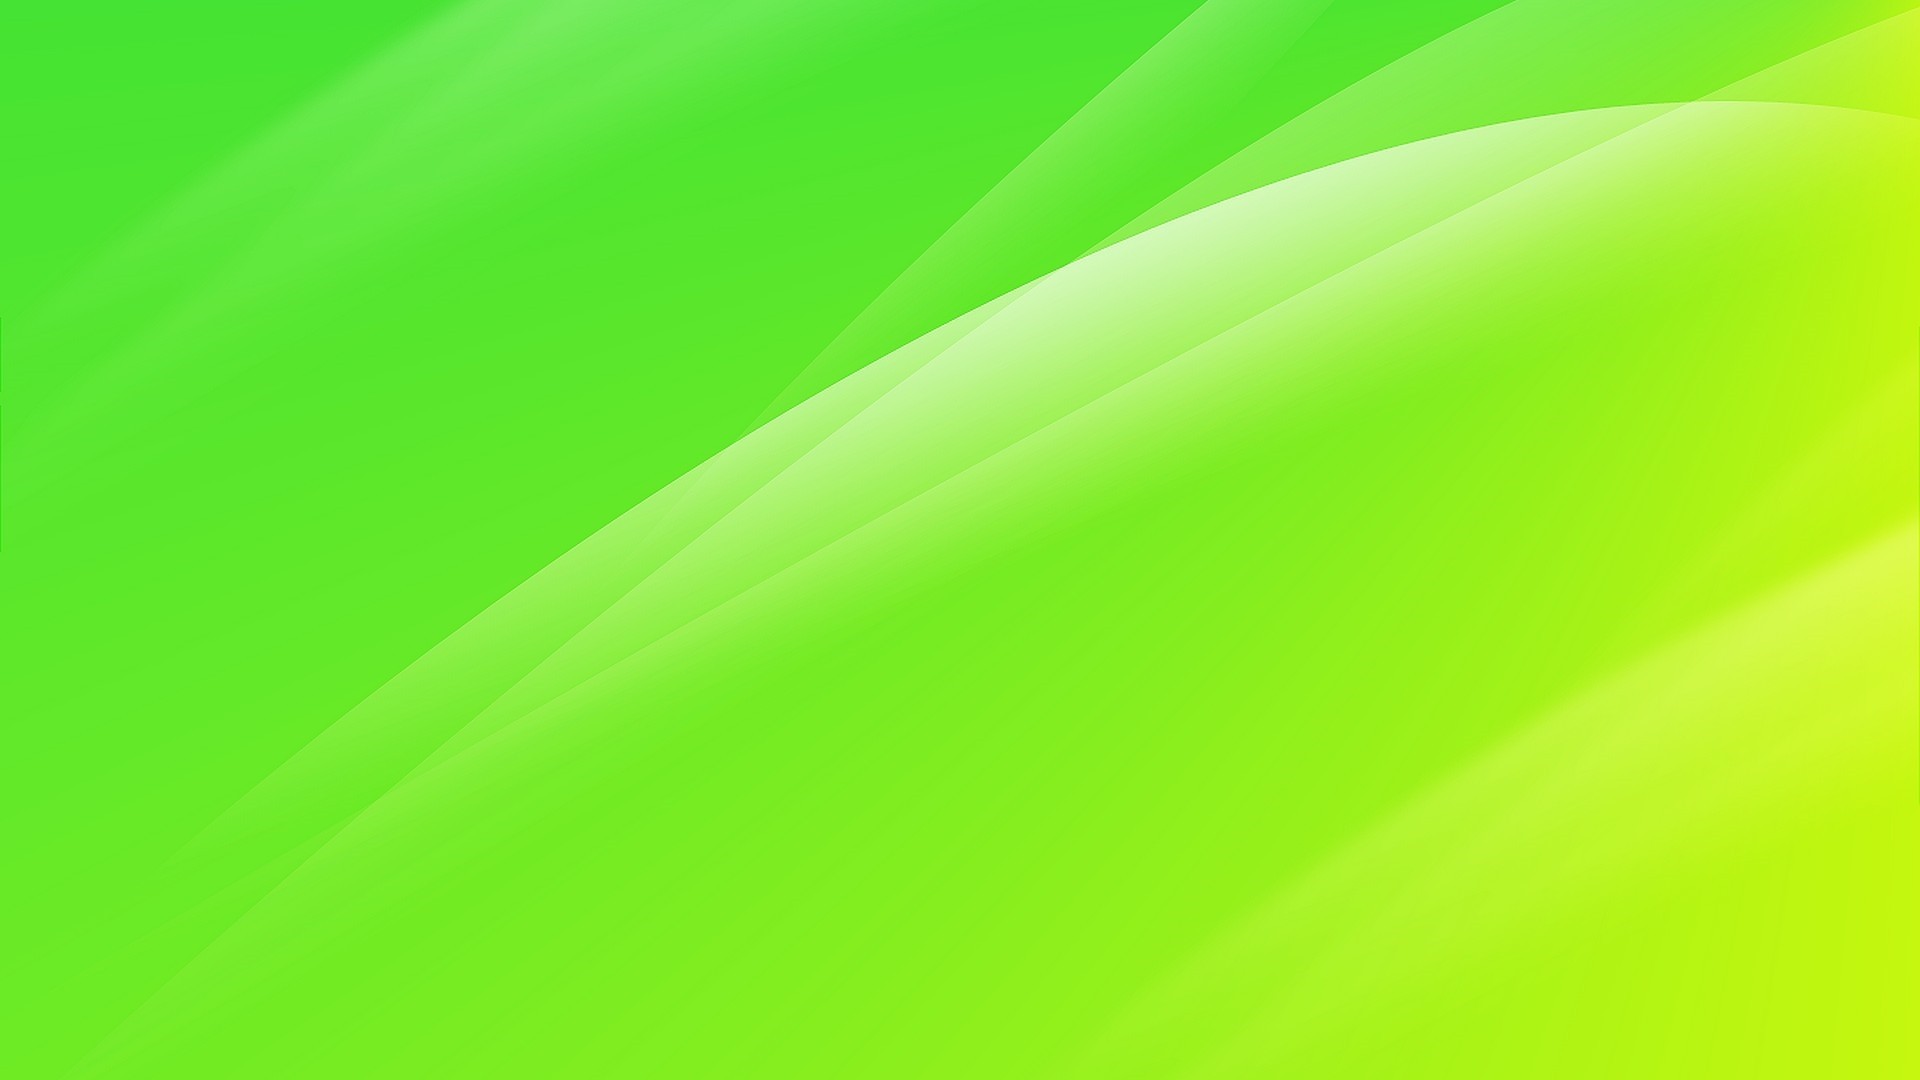 1500+] Green Background s | Wallpapers.com